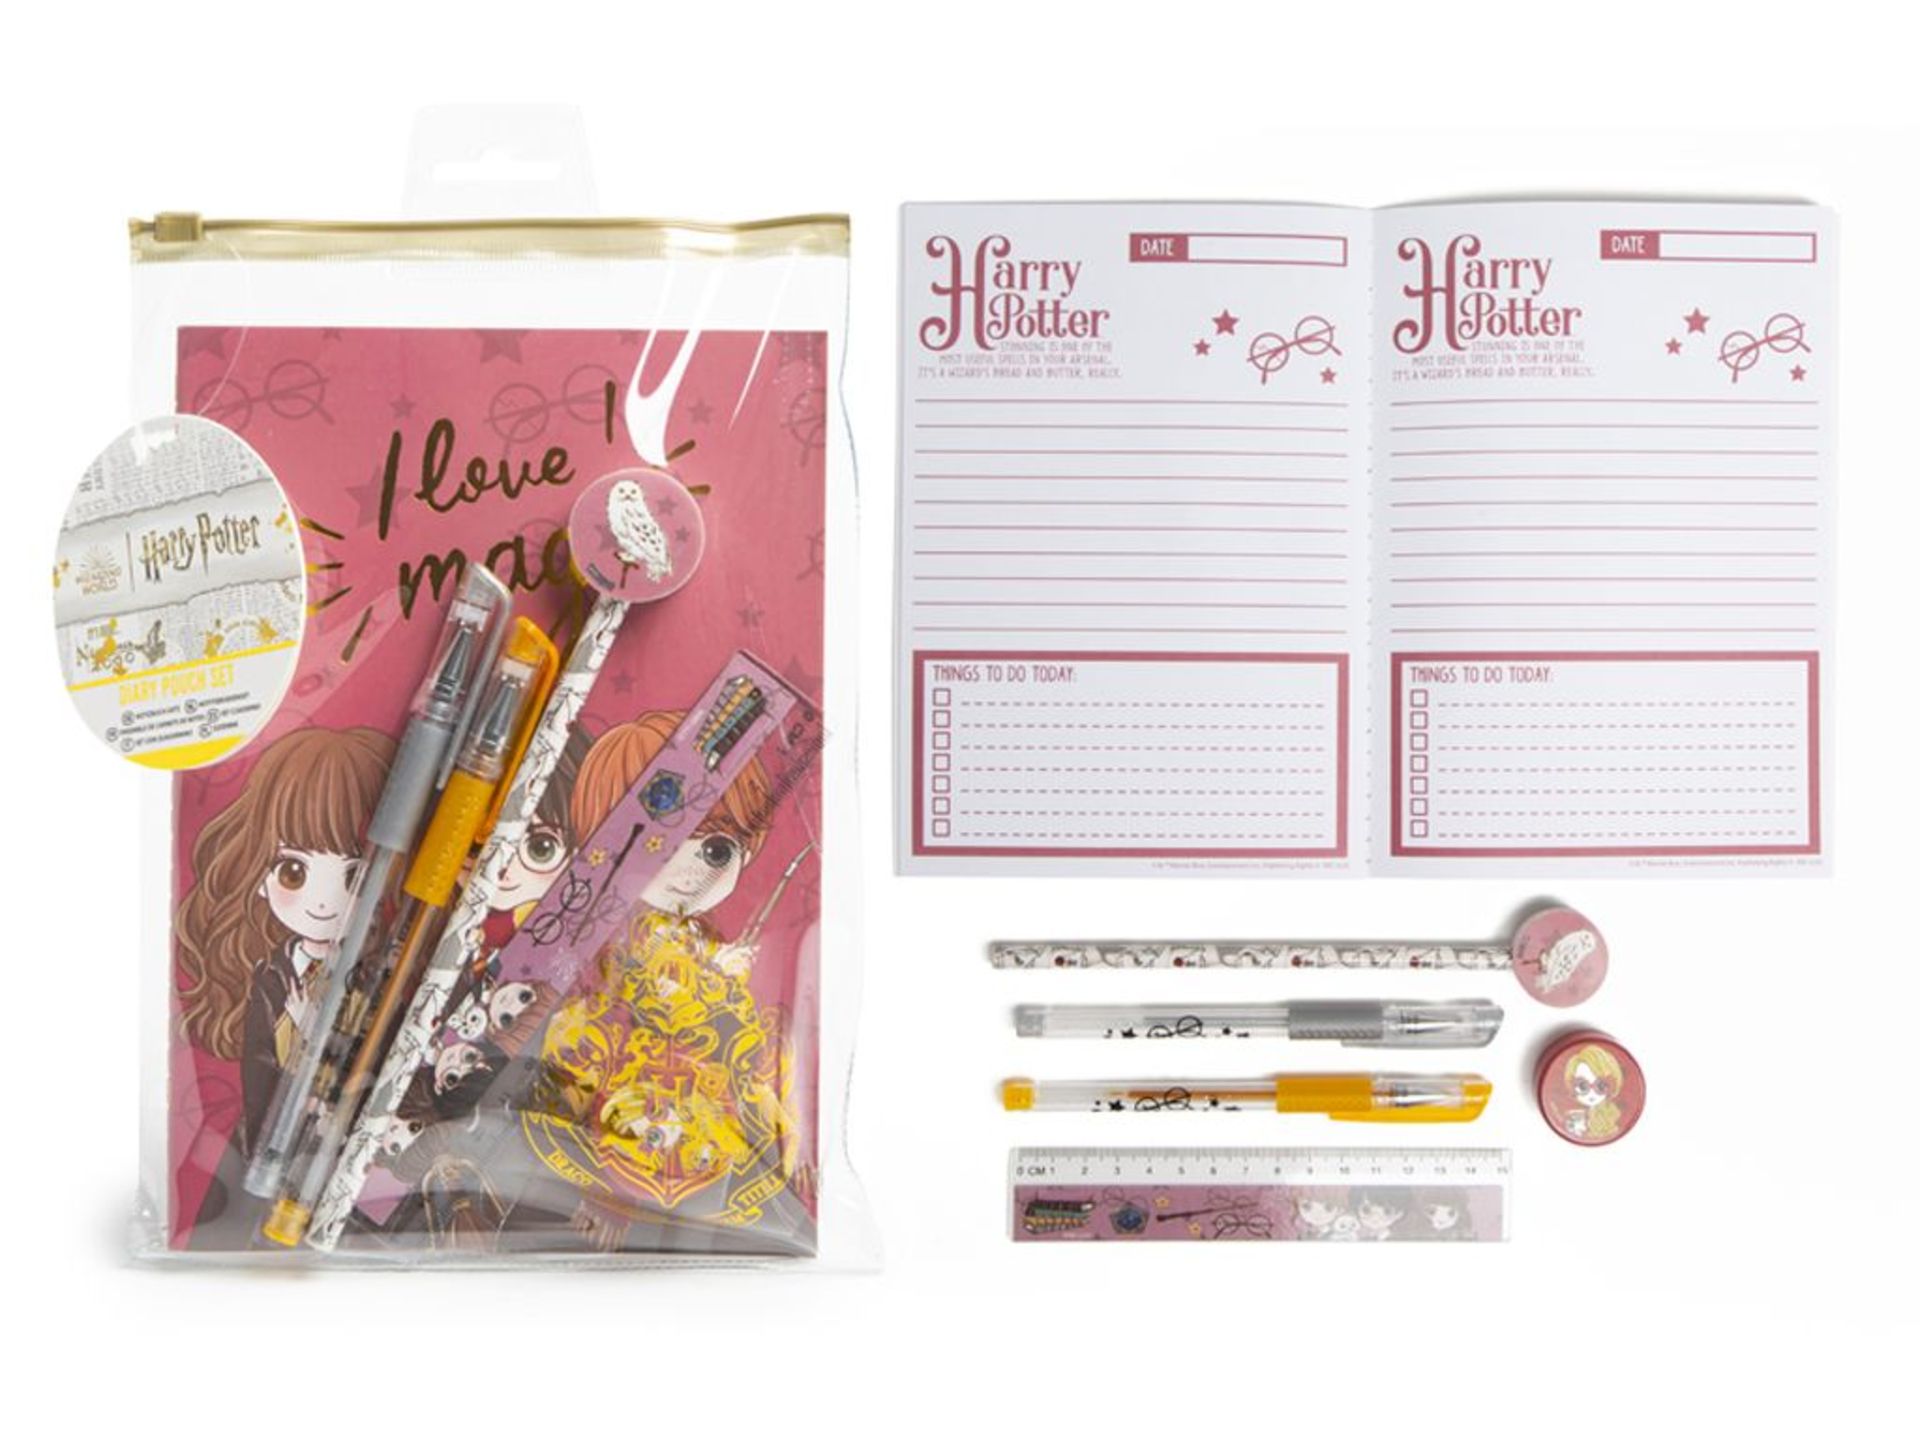 HARRY POTTER DIARY POUCH SET INCLUDES DIARY, 2 GEL PENS, PENCIL WITH ERASER, RULER & SHARPENER